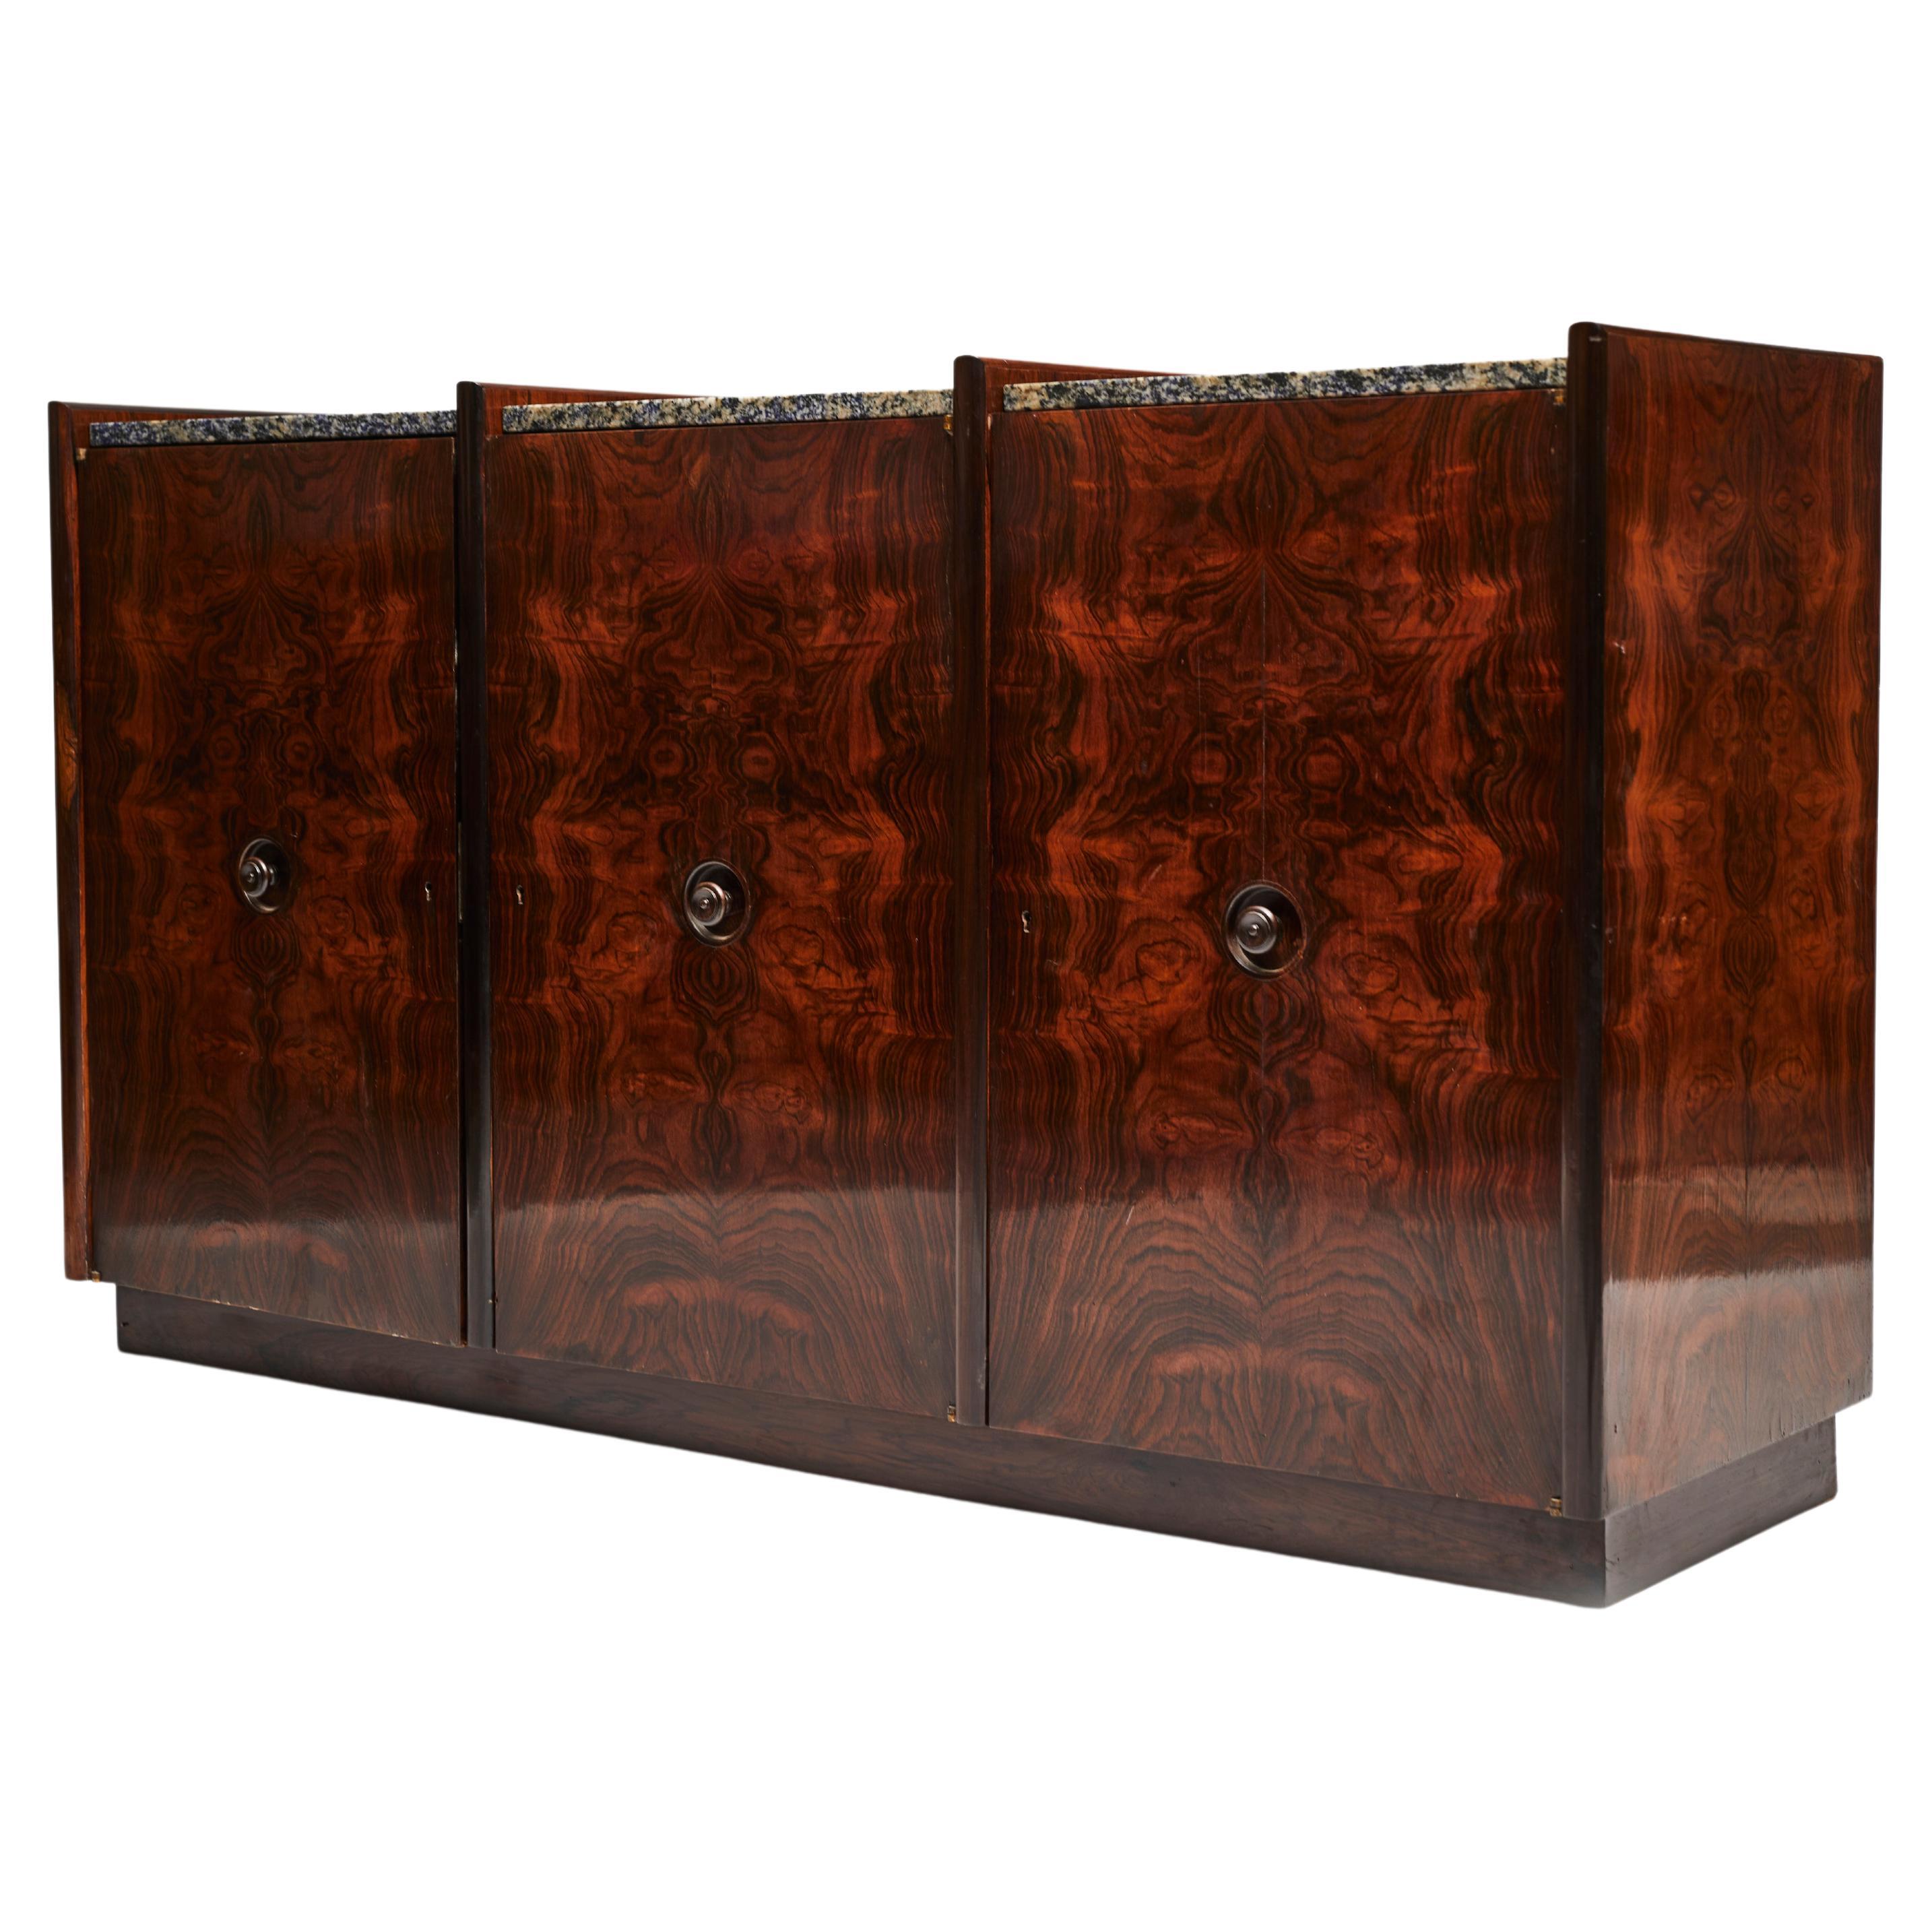 Available now, this Brazilian Modern credenza & room divider in hardwood and blue granite made in the 1960s in Brazil is nothing less than spectacular!

This exquisite piece is made in old Brazilian Rosewood (known as Jacaranda), Granite and is